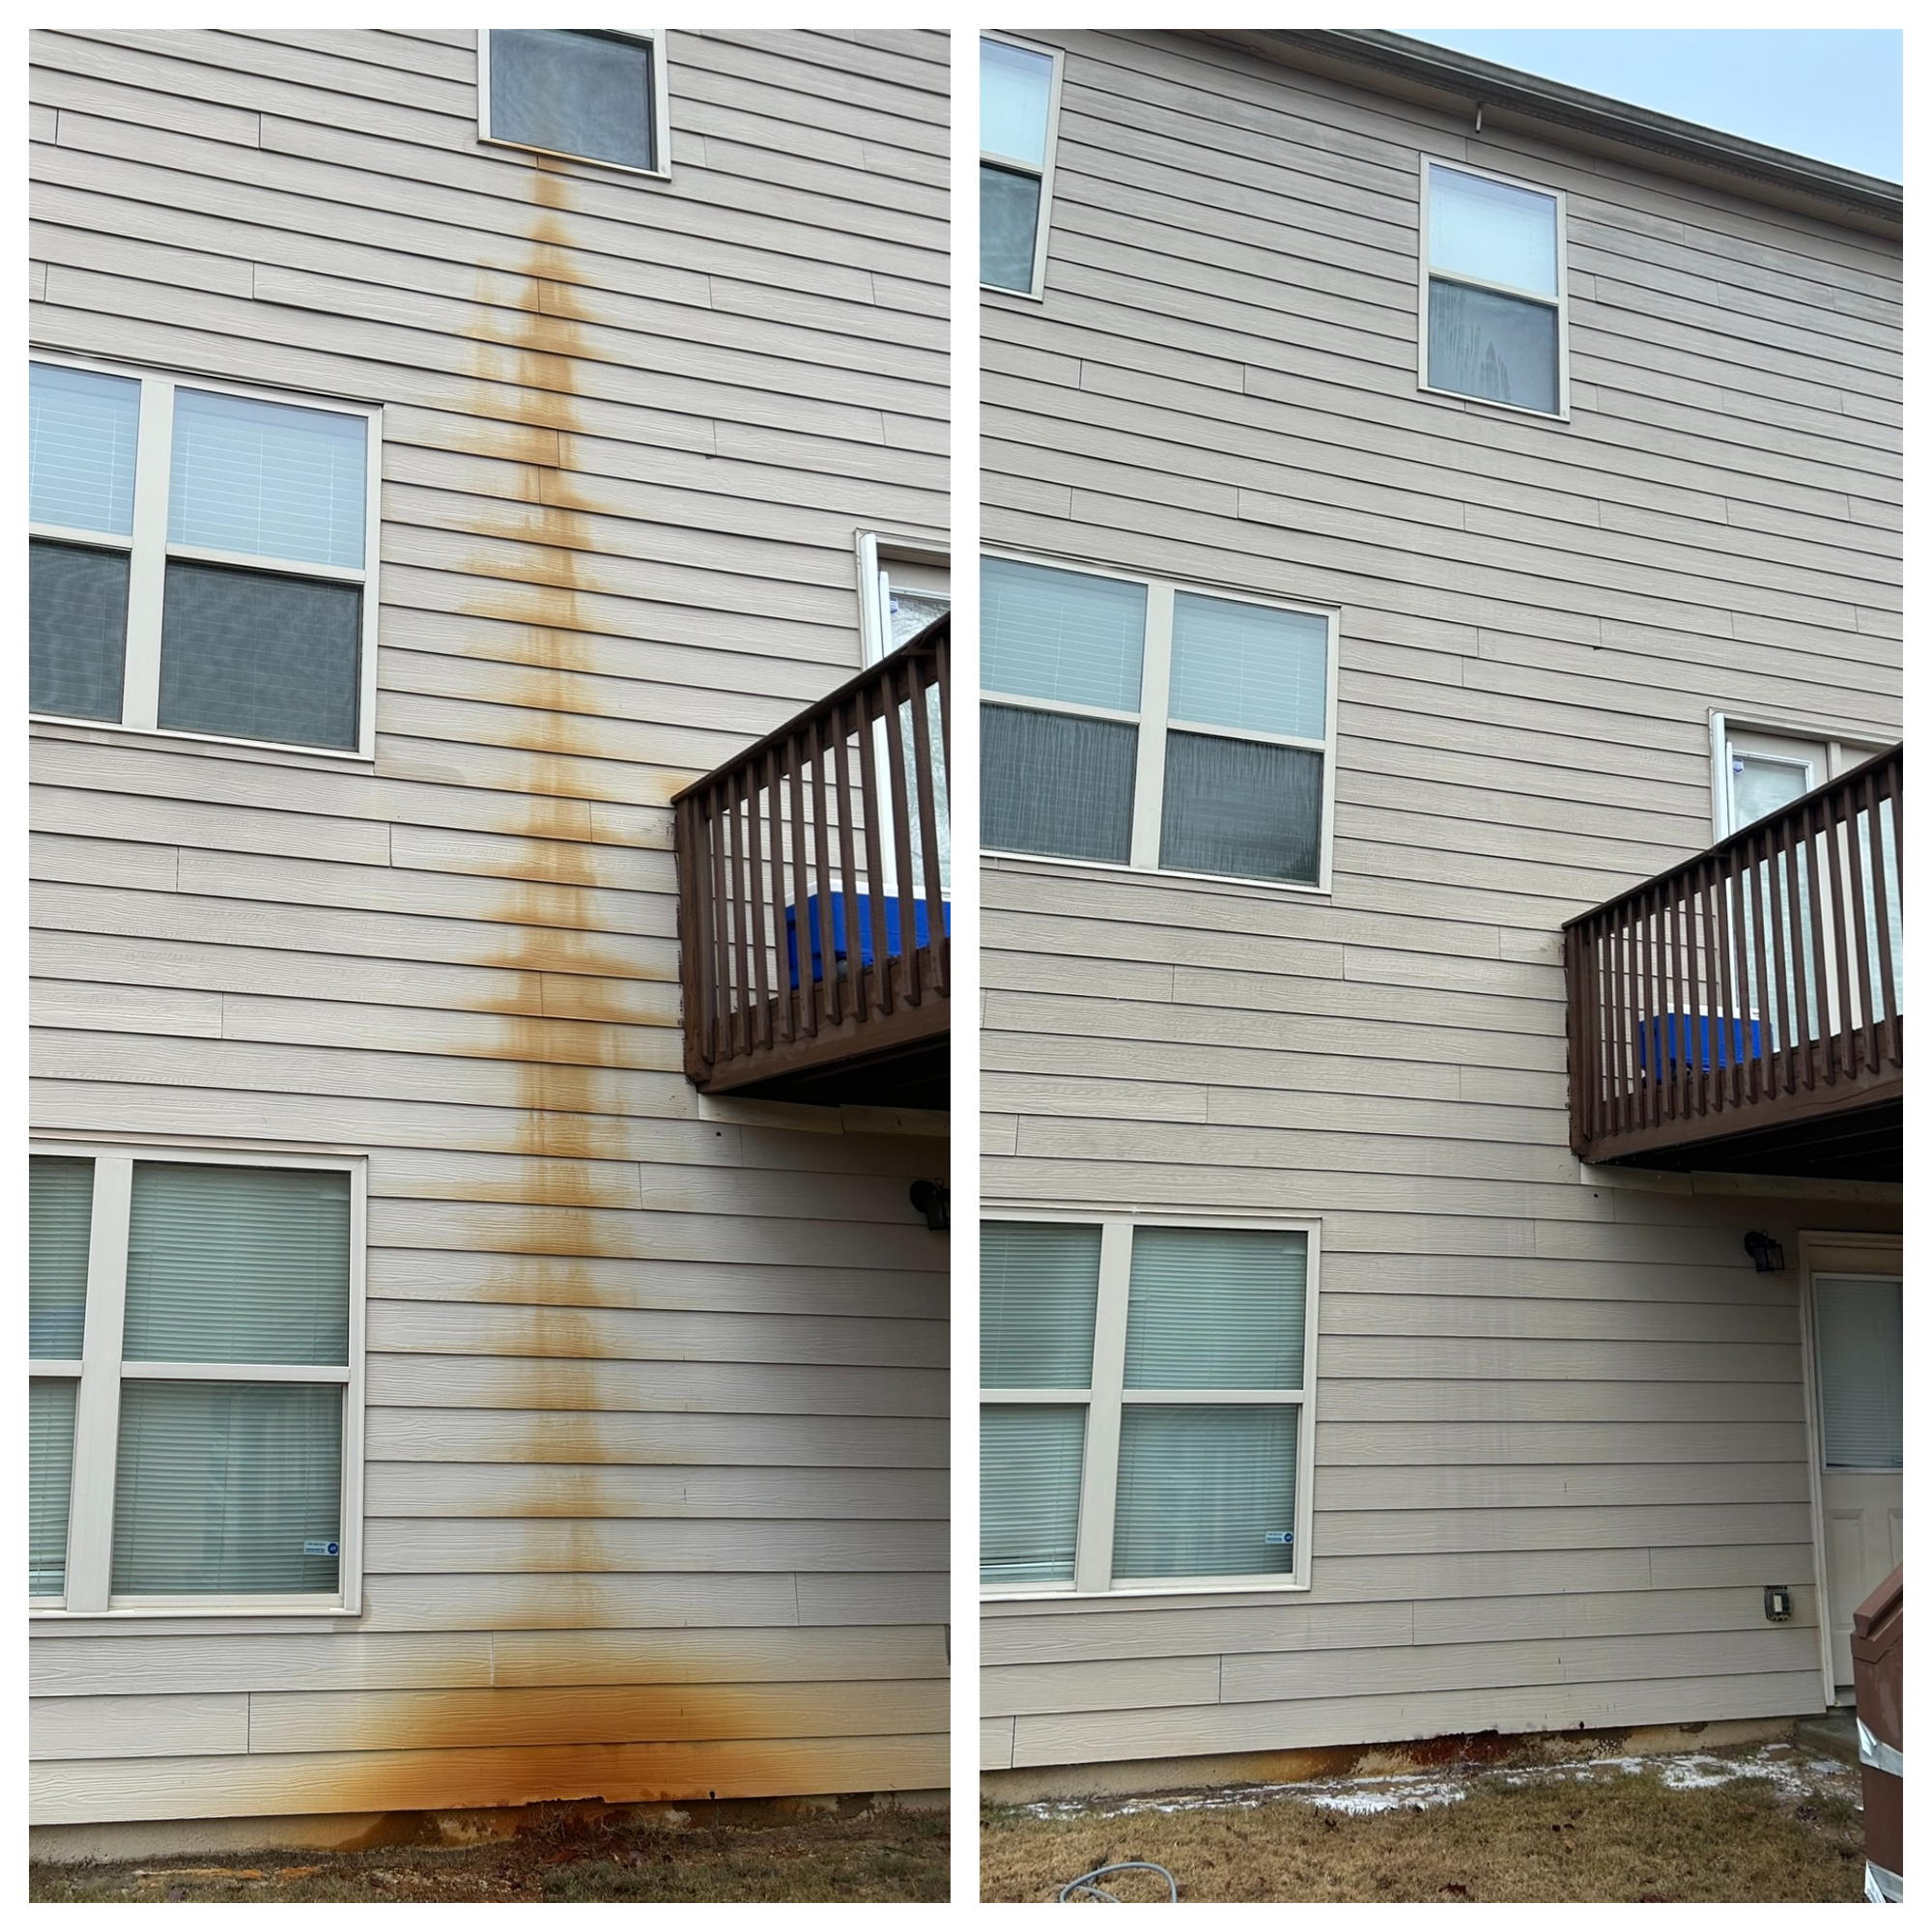 This Conyers Homeowner Said Goodbye to These Unsightly Rust Stains